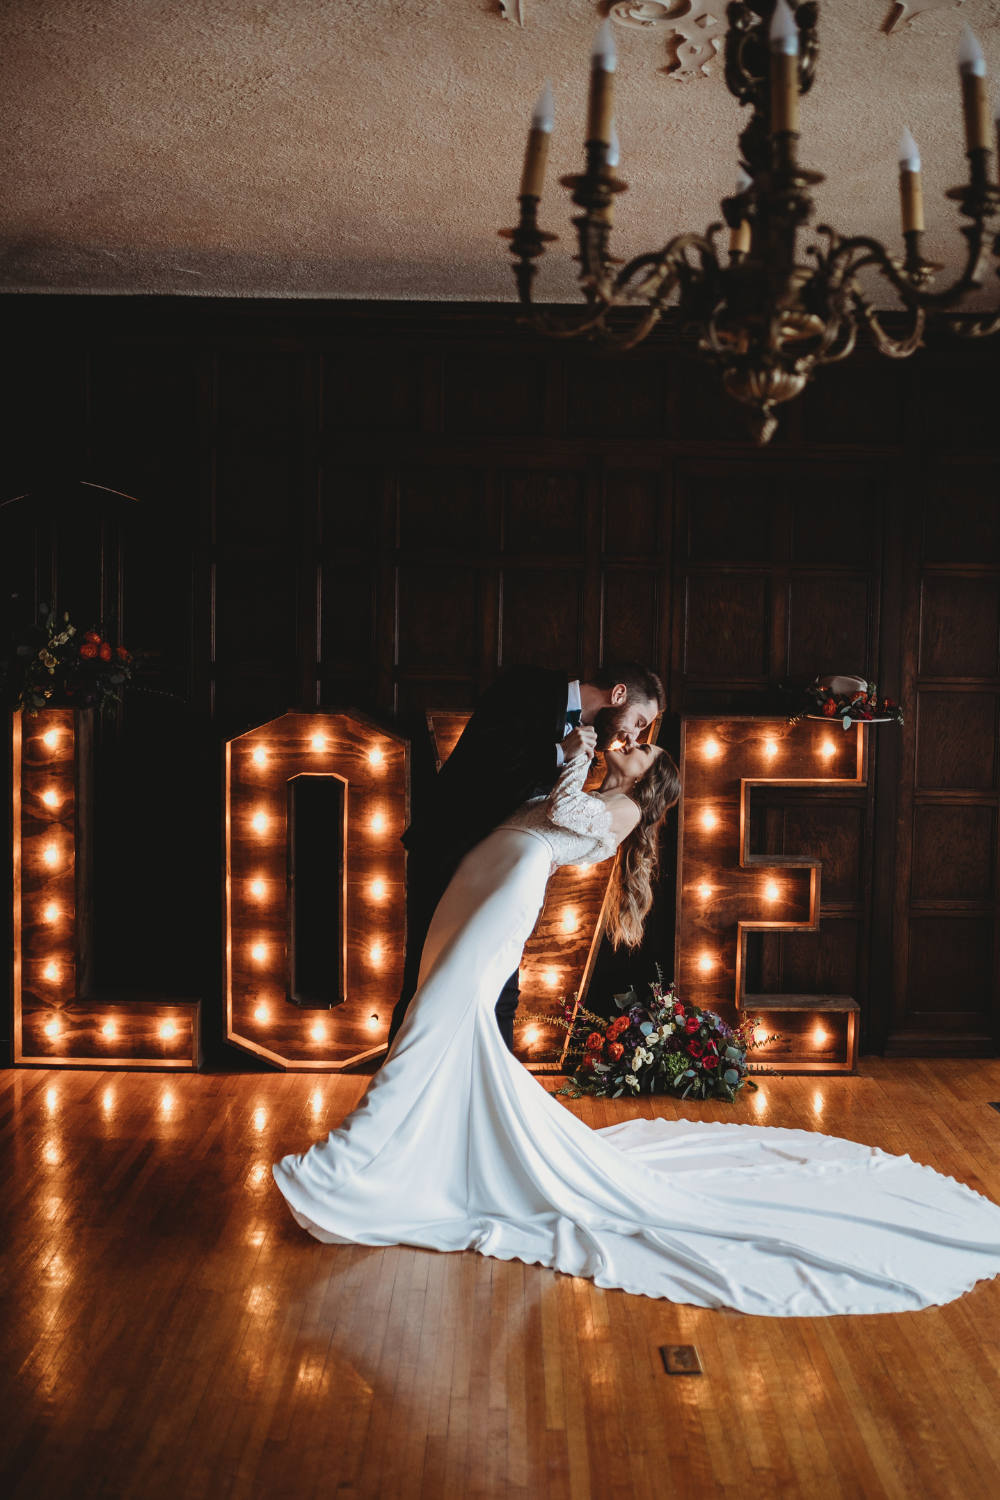 Wedding and event marquee letter rental